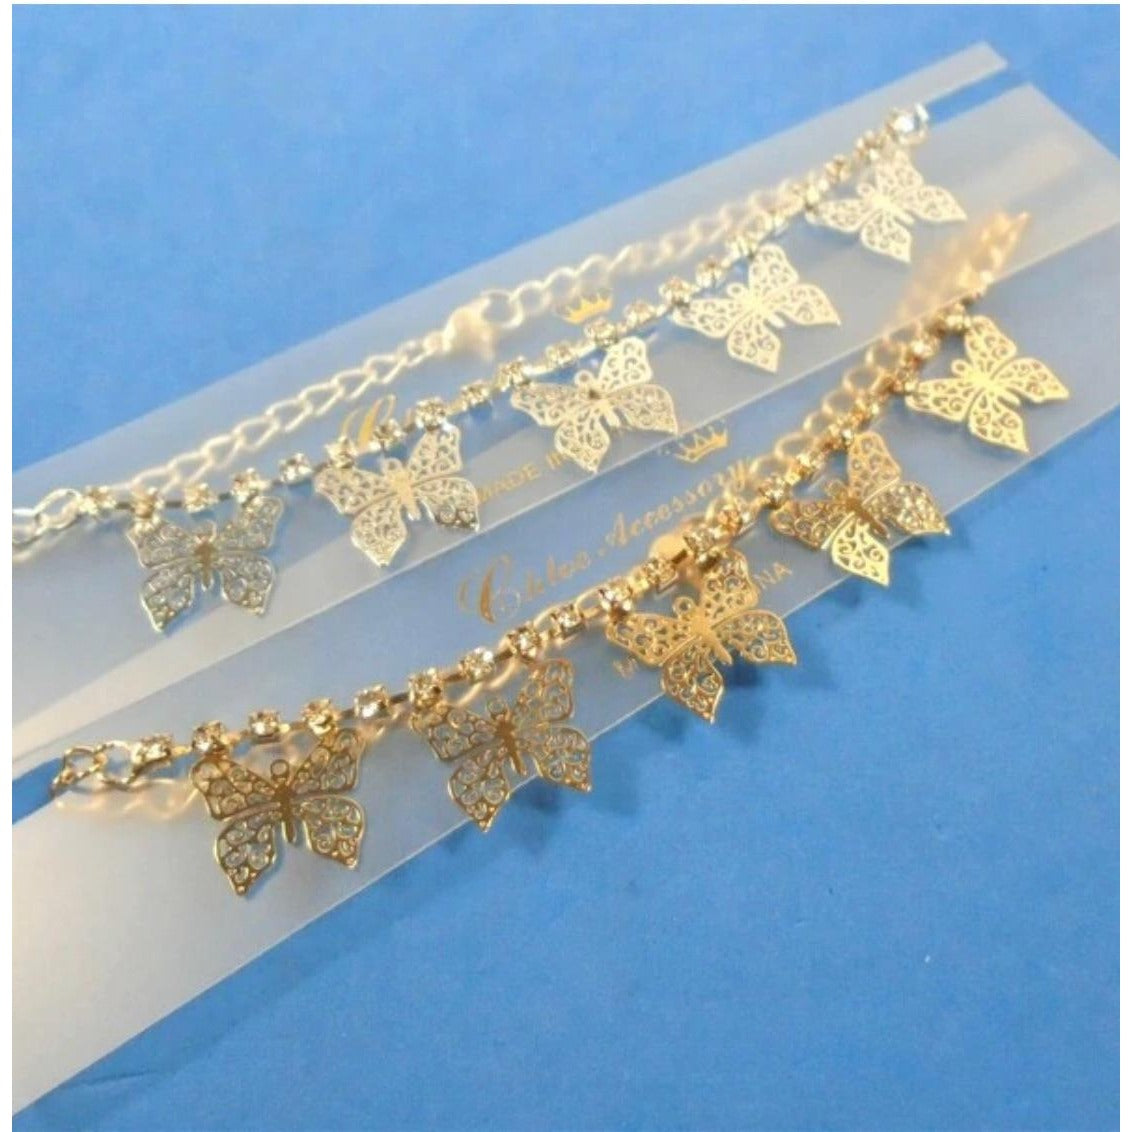 Gold or Silver Chain & Rhinestone Anklets w/ Dangle Butterflies  2089